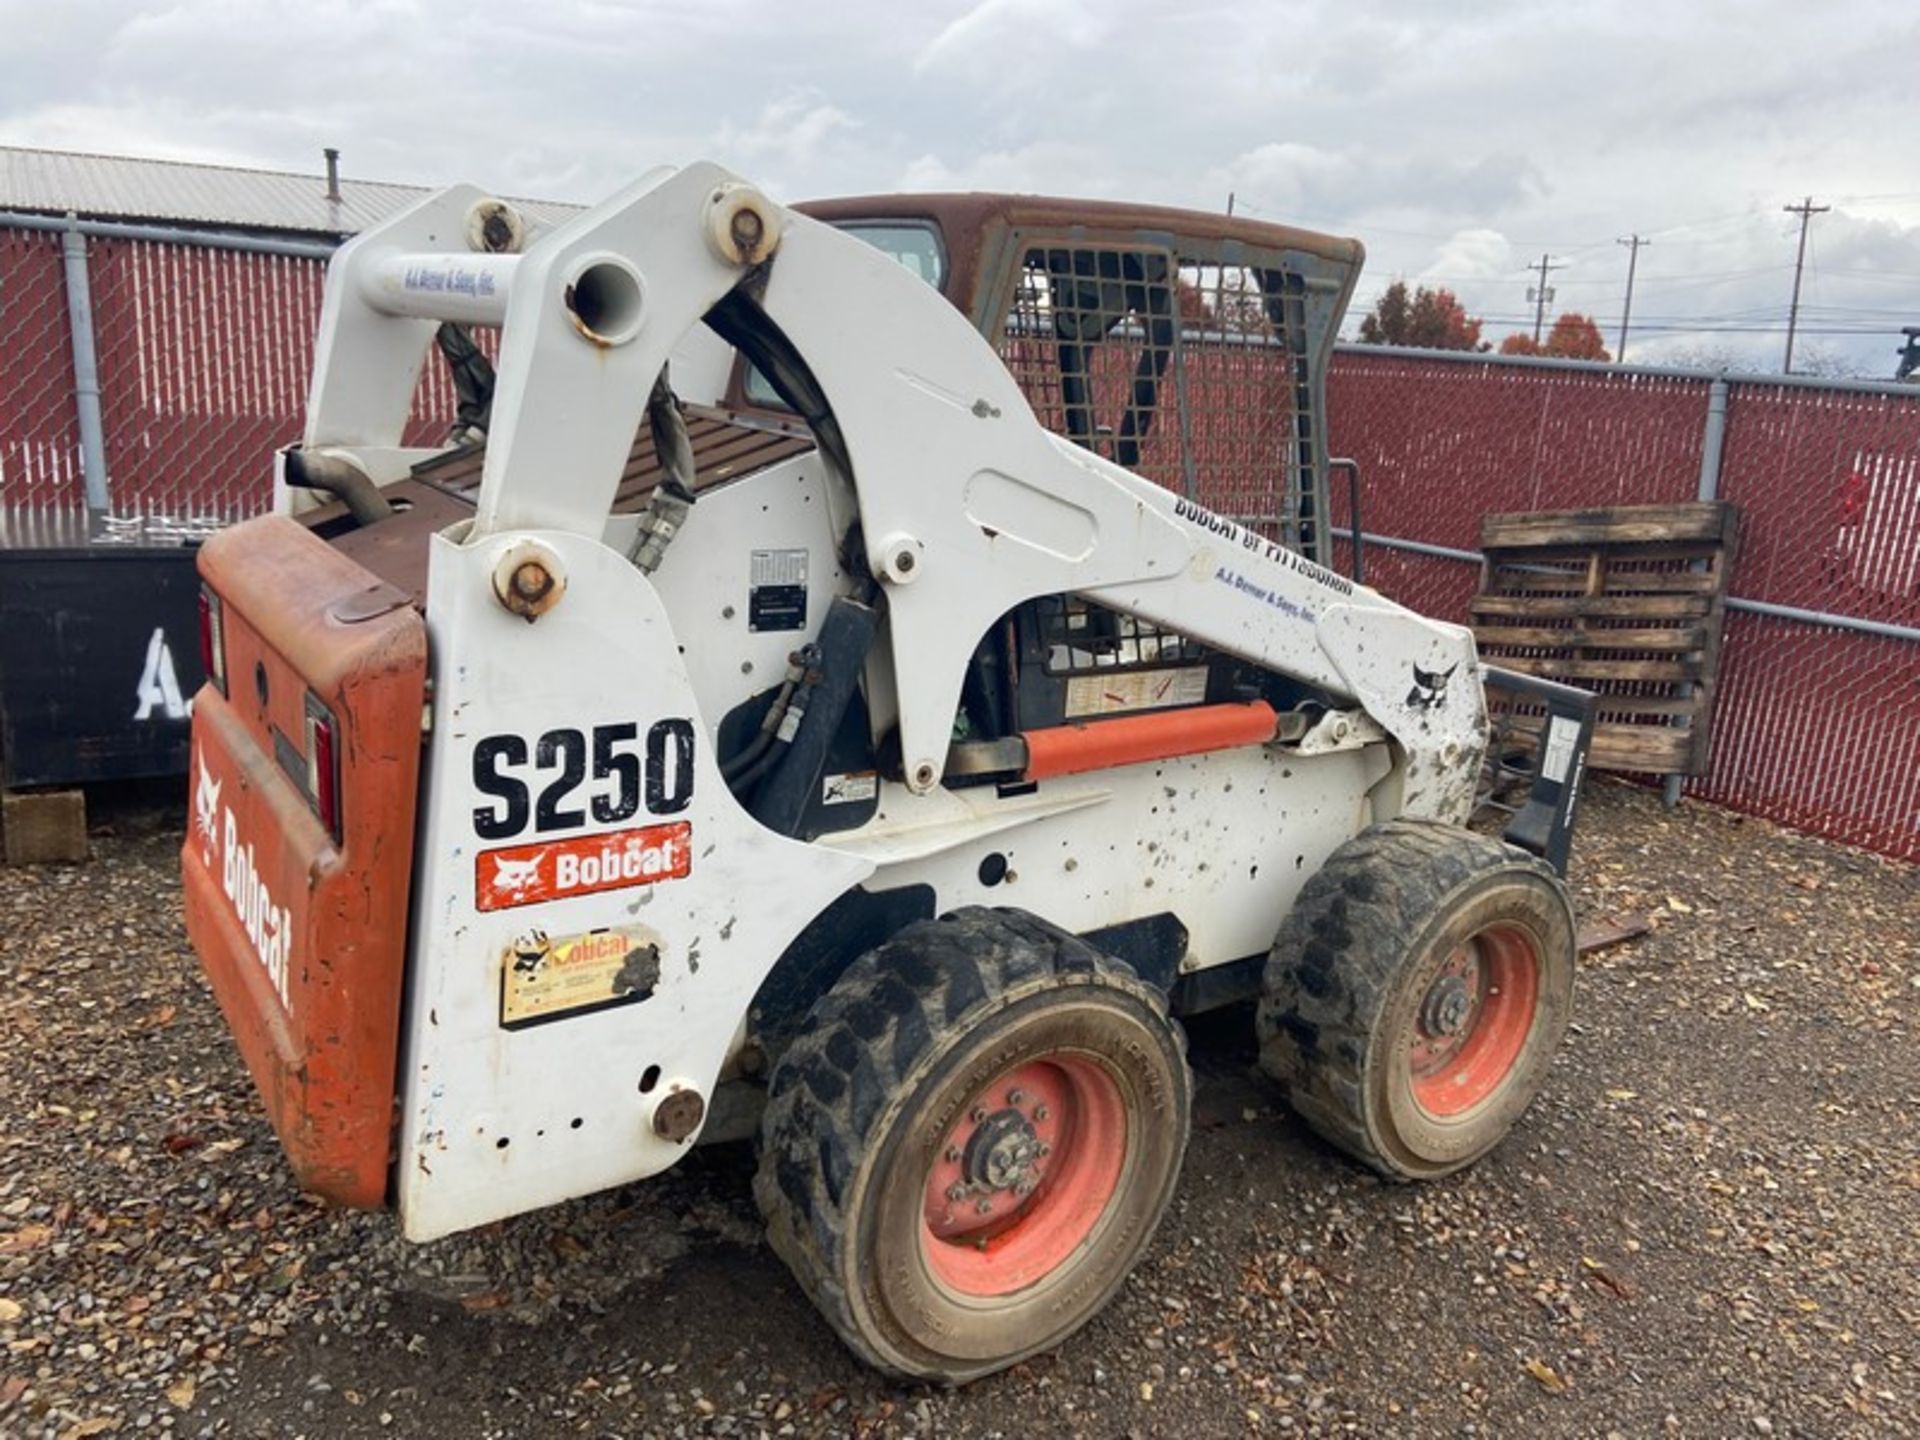 2010 Bobcat S250 Compact Skid Steer, VIN#: A5GM36985, with Fork Attachment (NOTE: DELAYED REMOVAL - Image 7 of 12